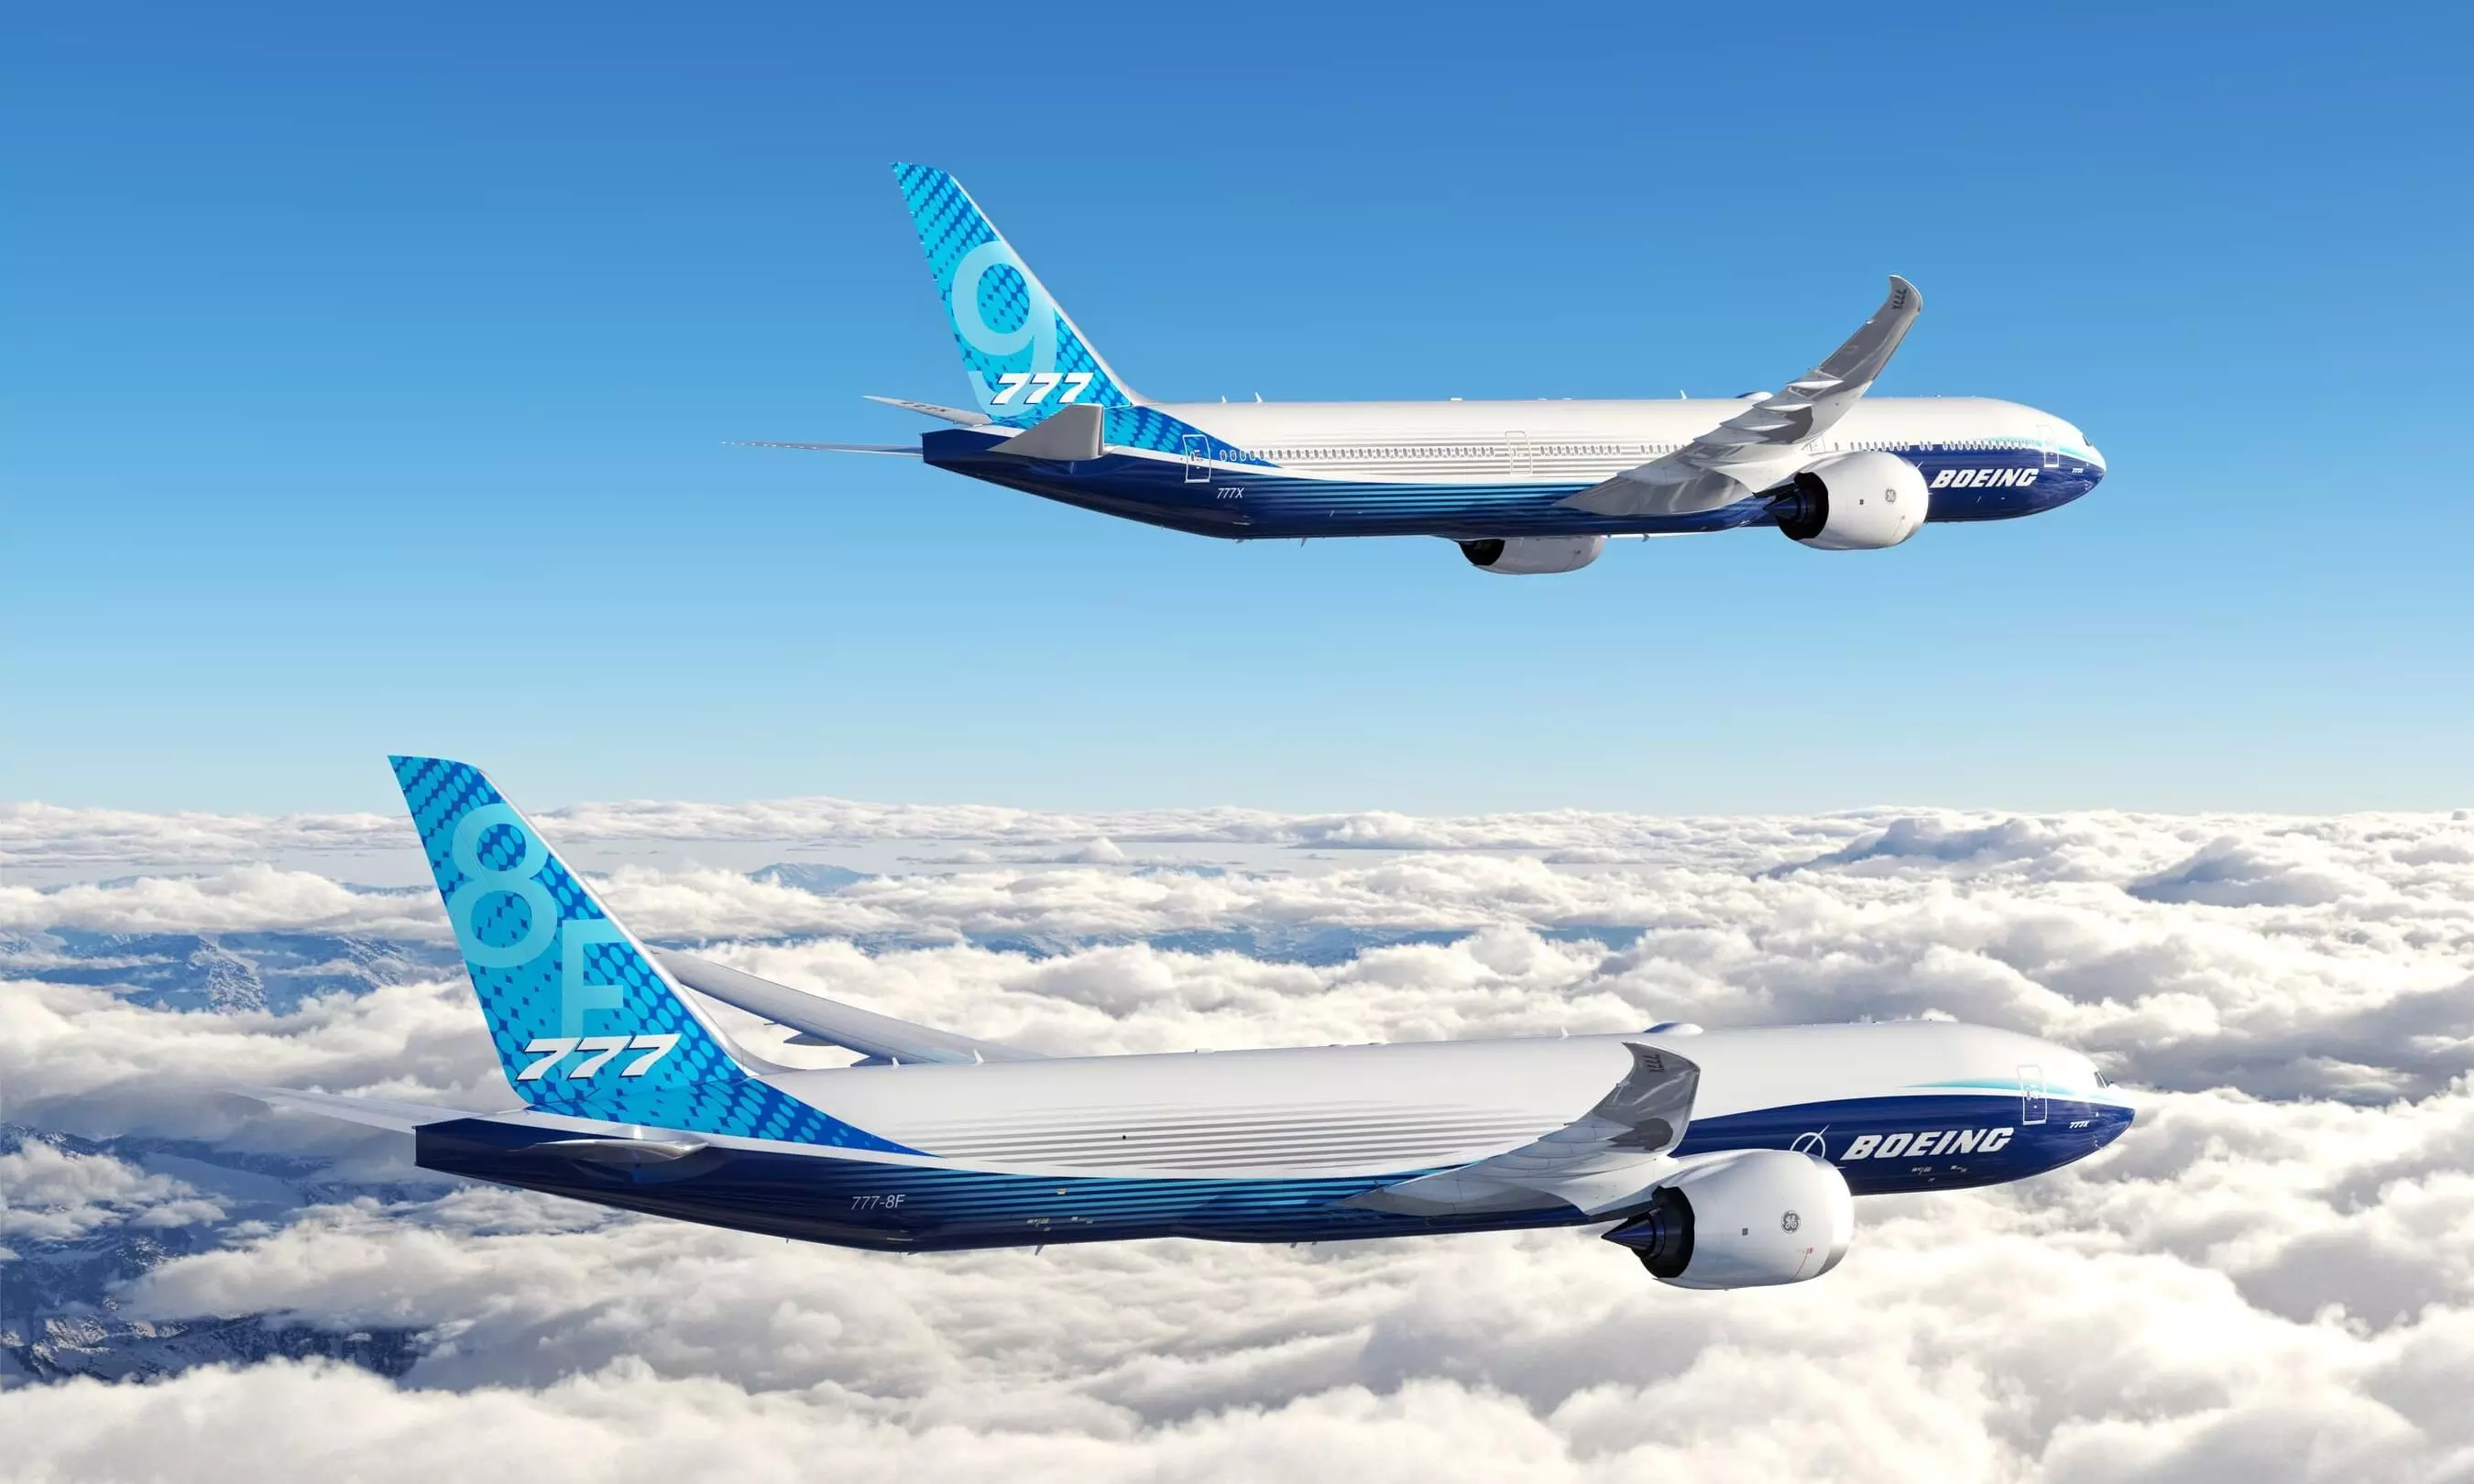 Boeing expects 925 new freighter deliveries by 2042